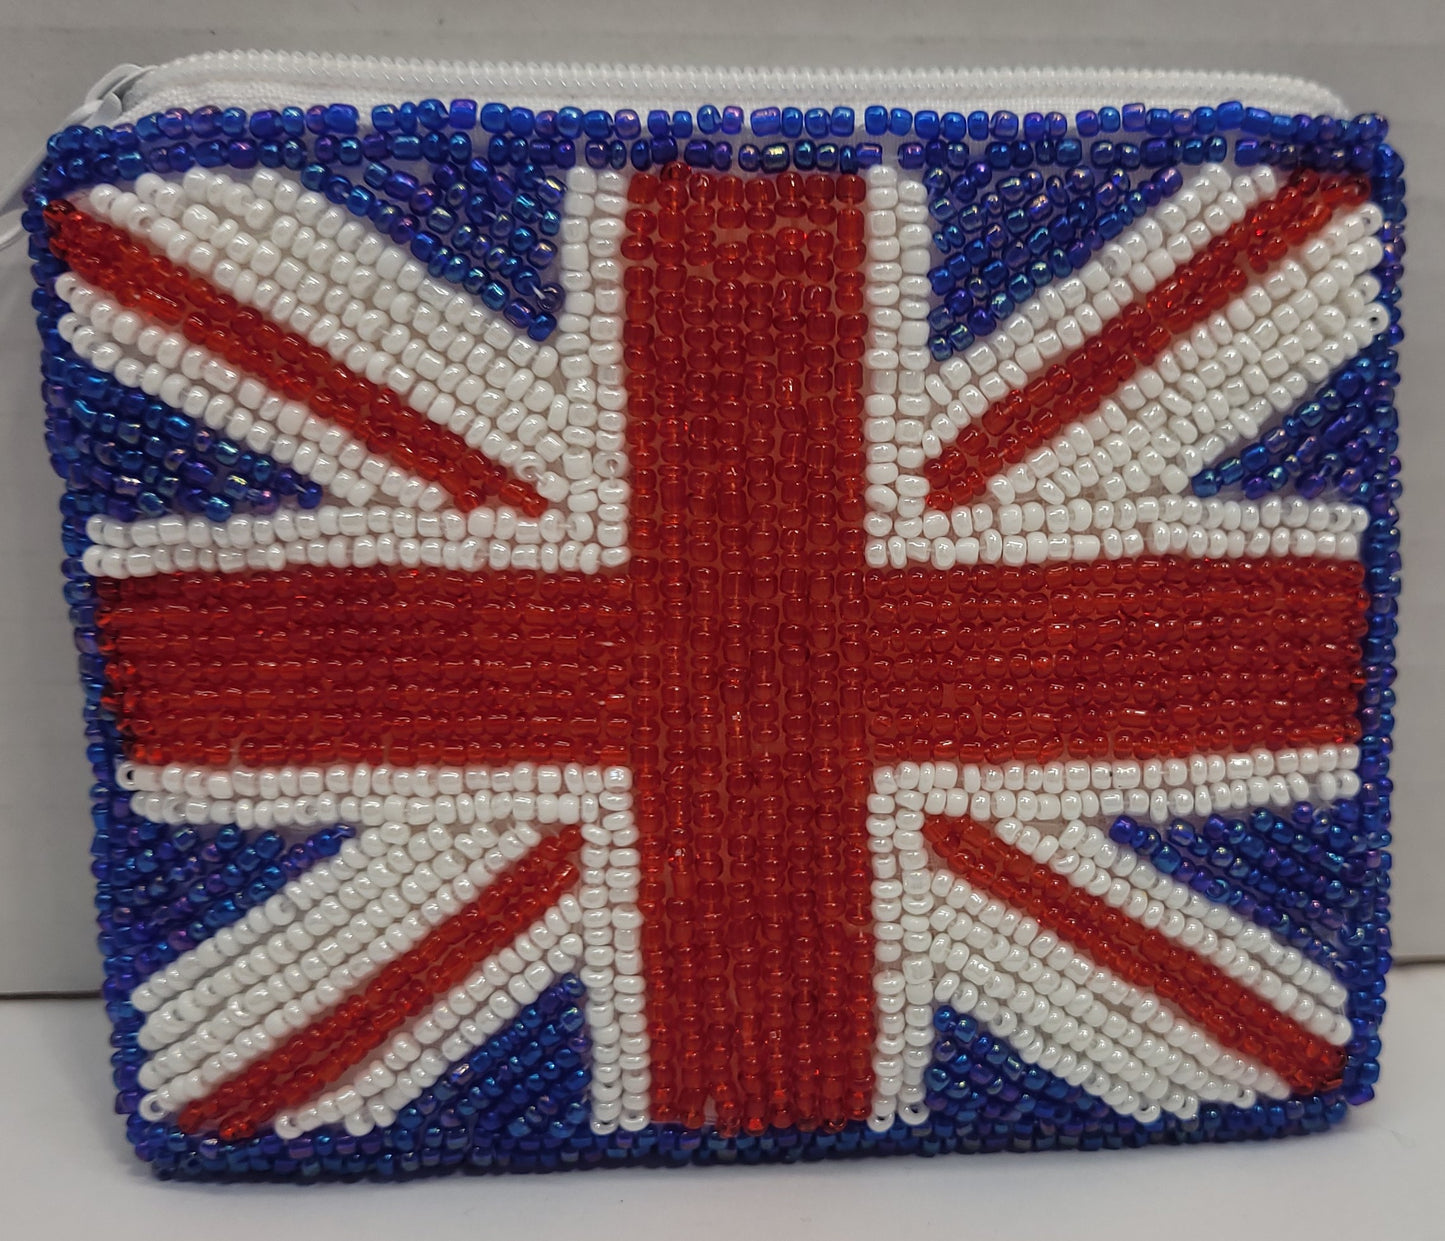 Union Jack beaded change purse with zipper.  Liner inside is white.